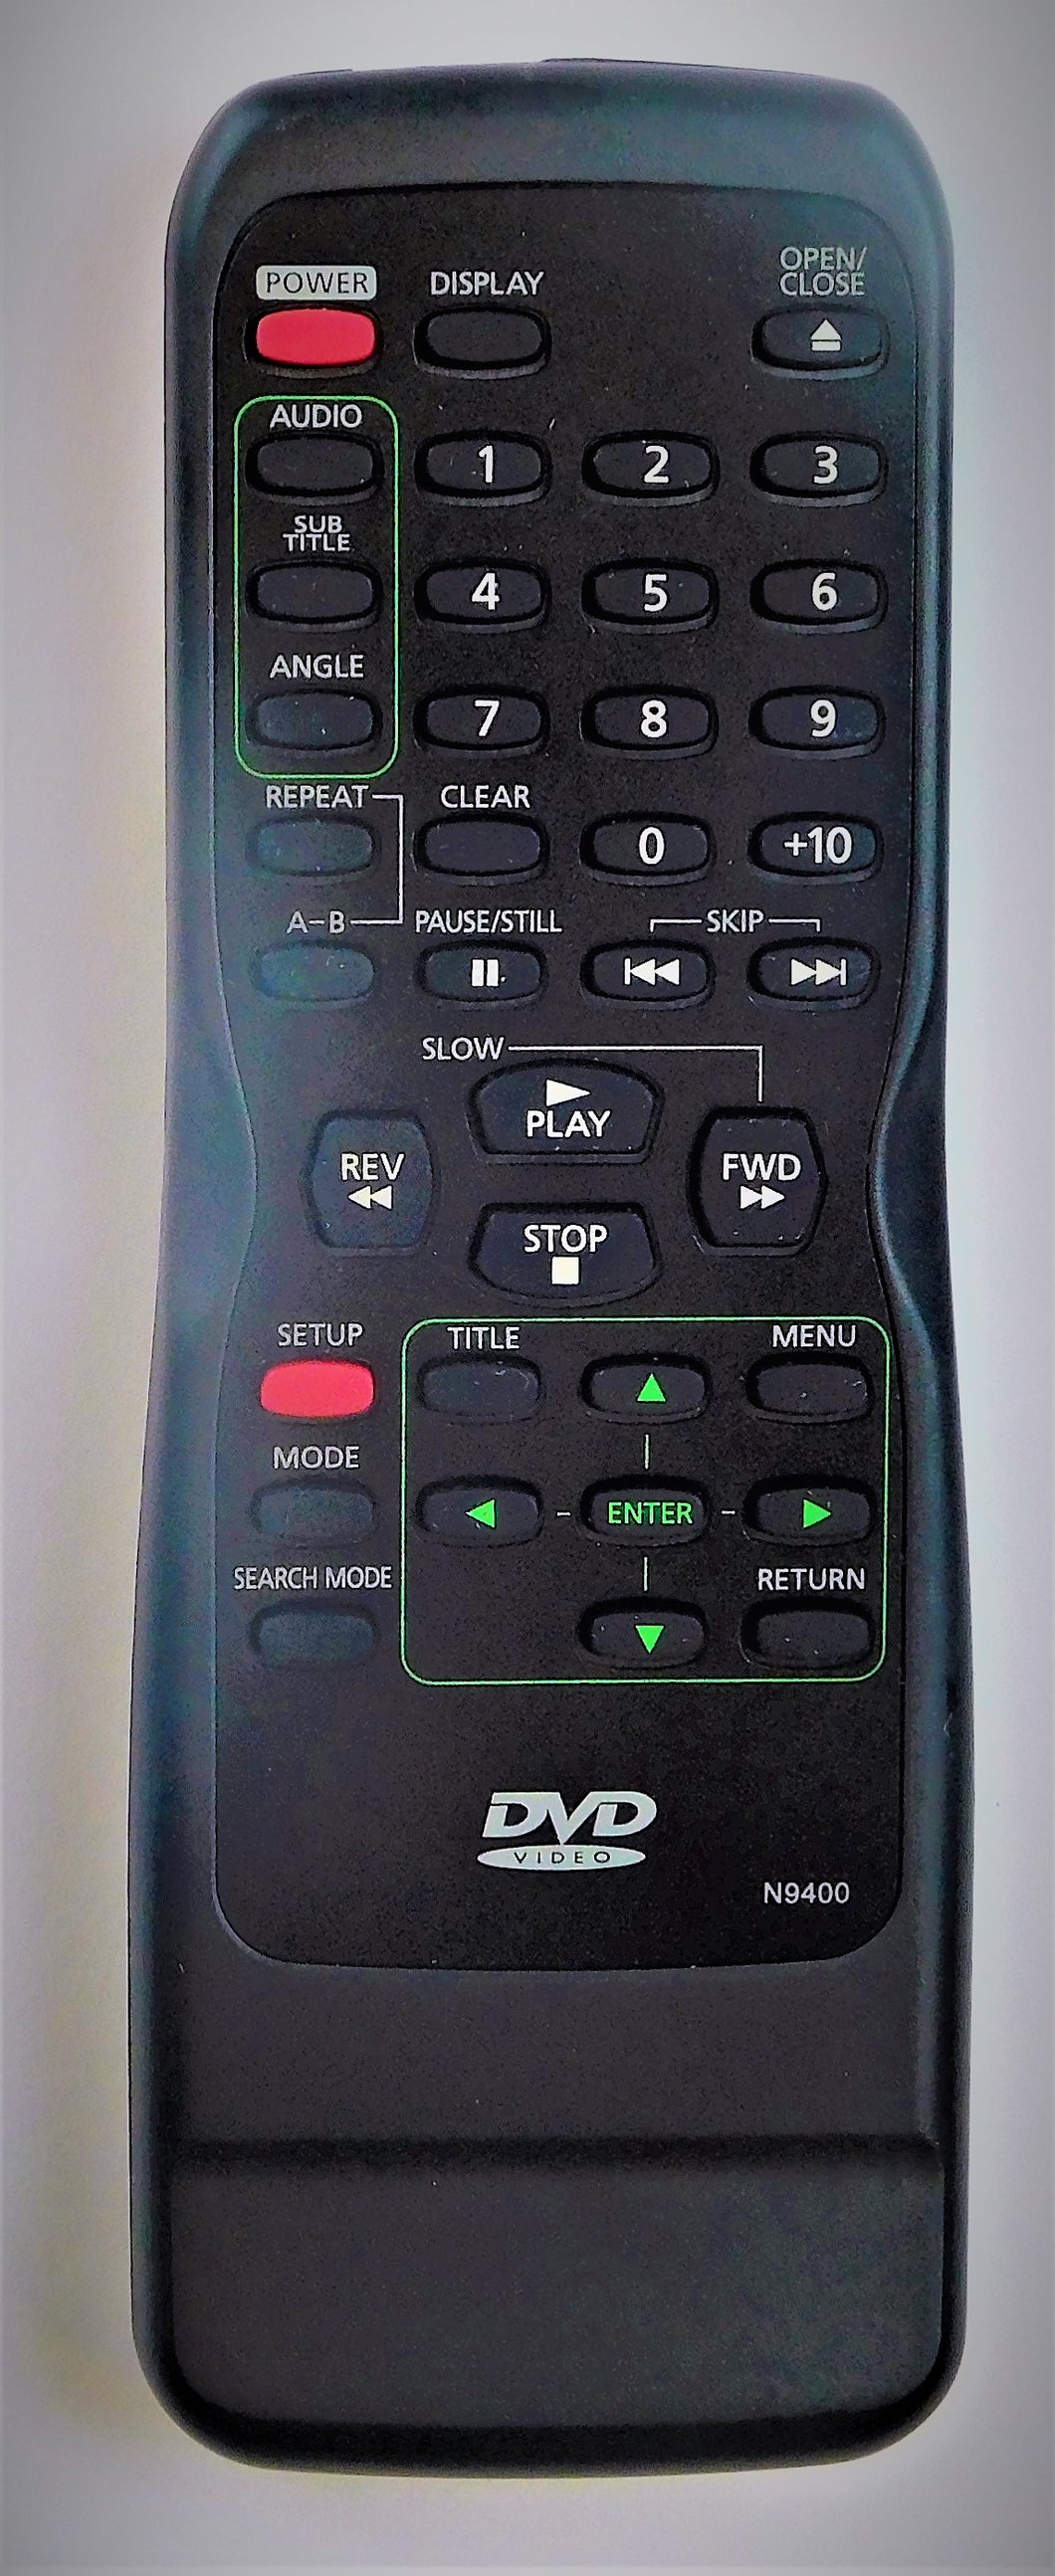 OEM replacement remote control for Sylvania DVD Players N9400UD